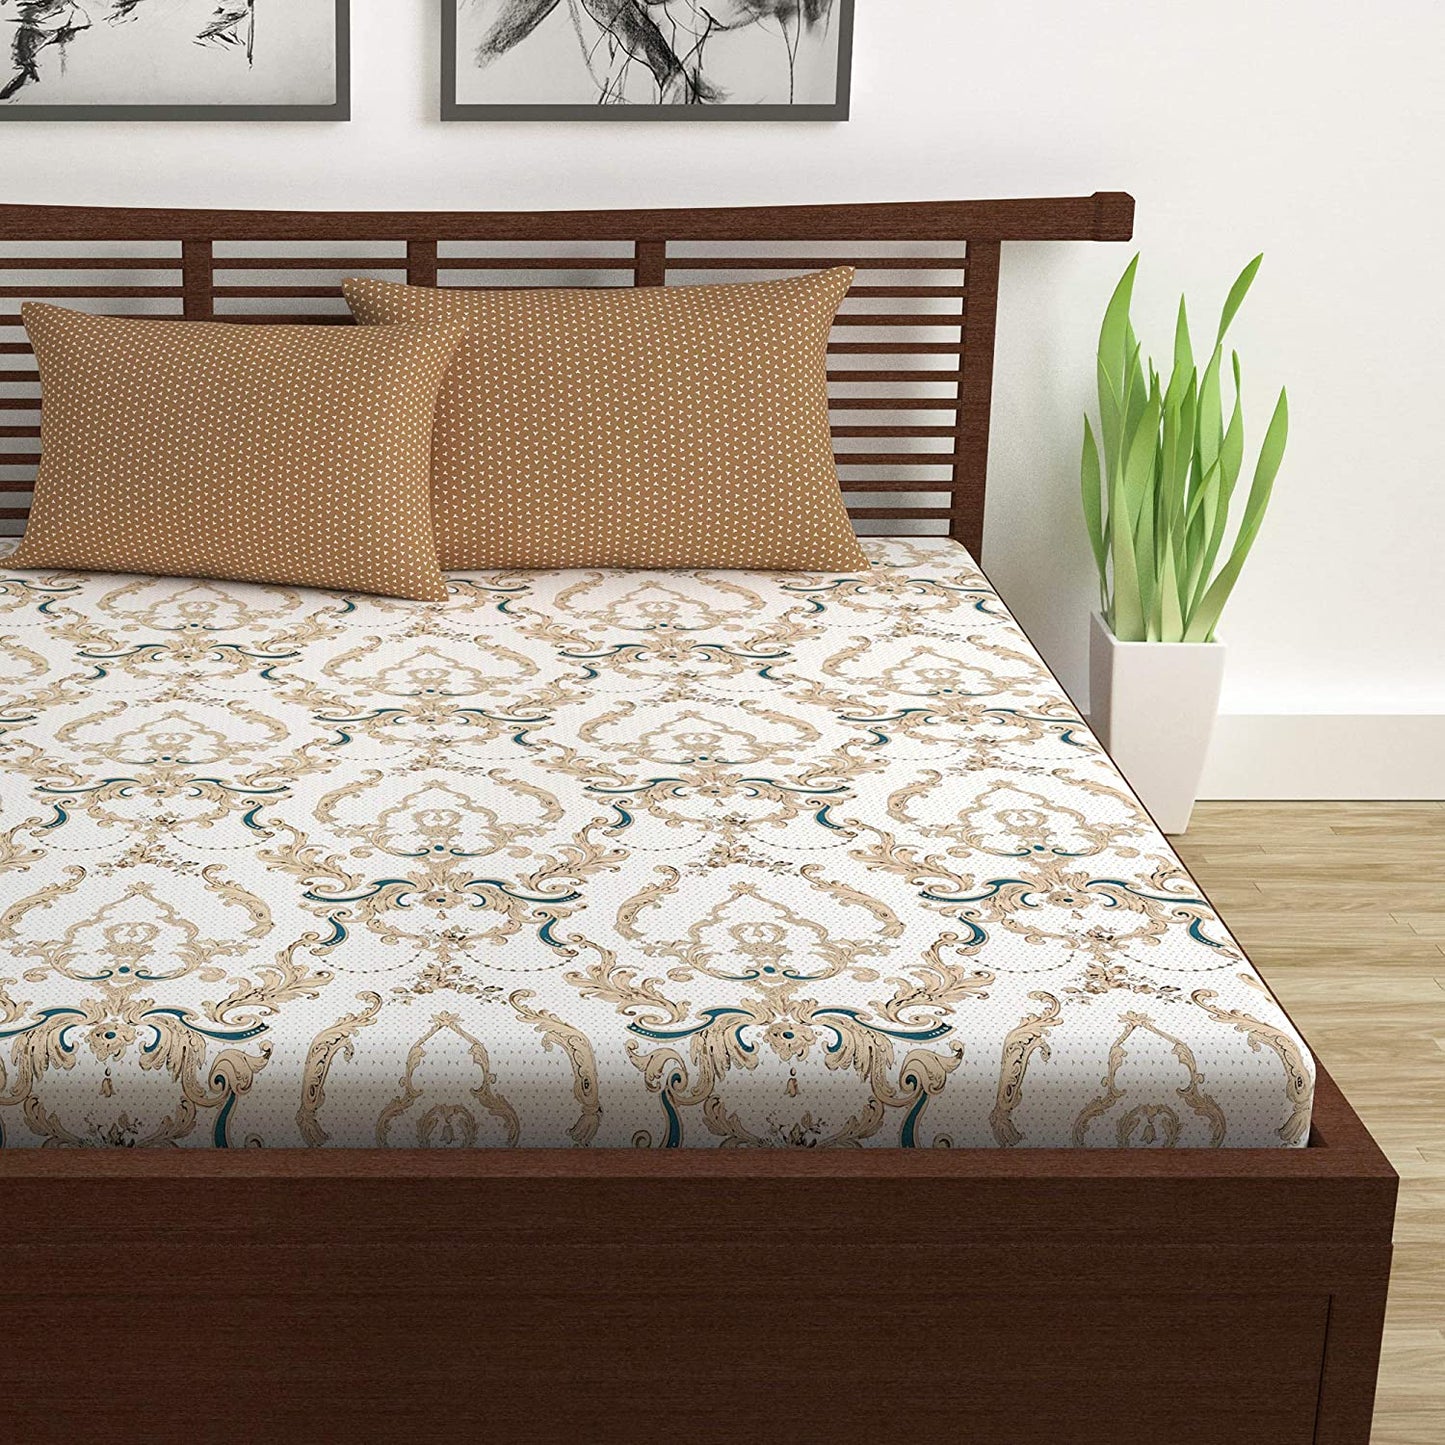 Peach 144 TC 100% Cotton kalamkari retro Double Bed Bedsheet with 2 Pillow Covers Bed Sheet For Bedroom